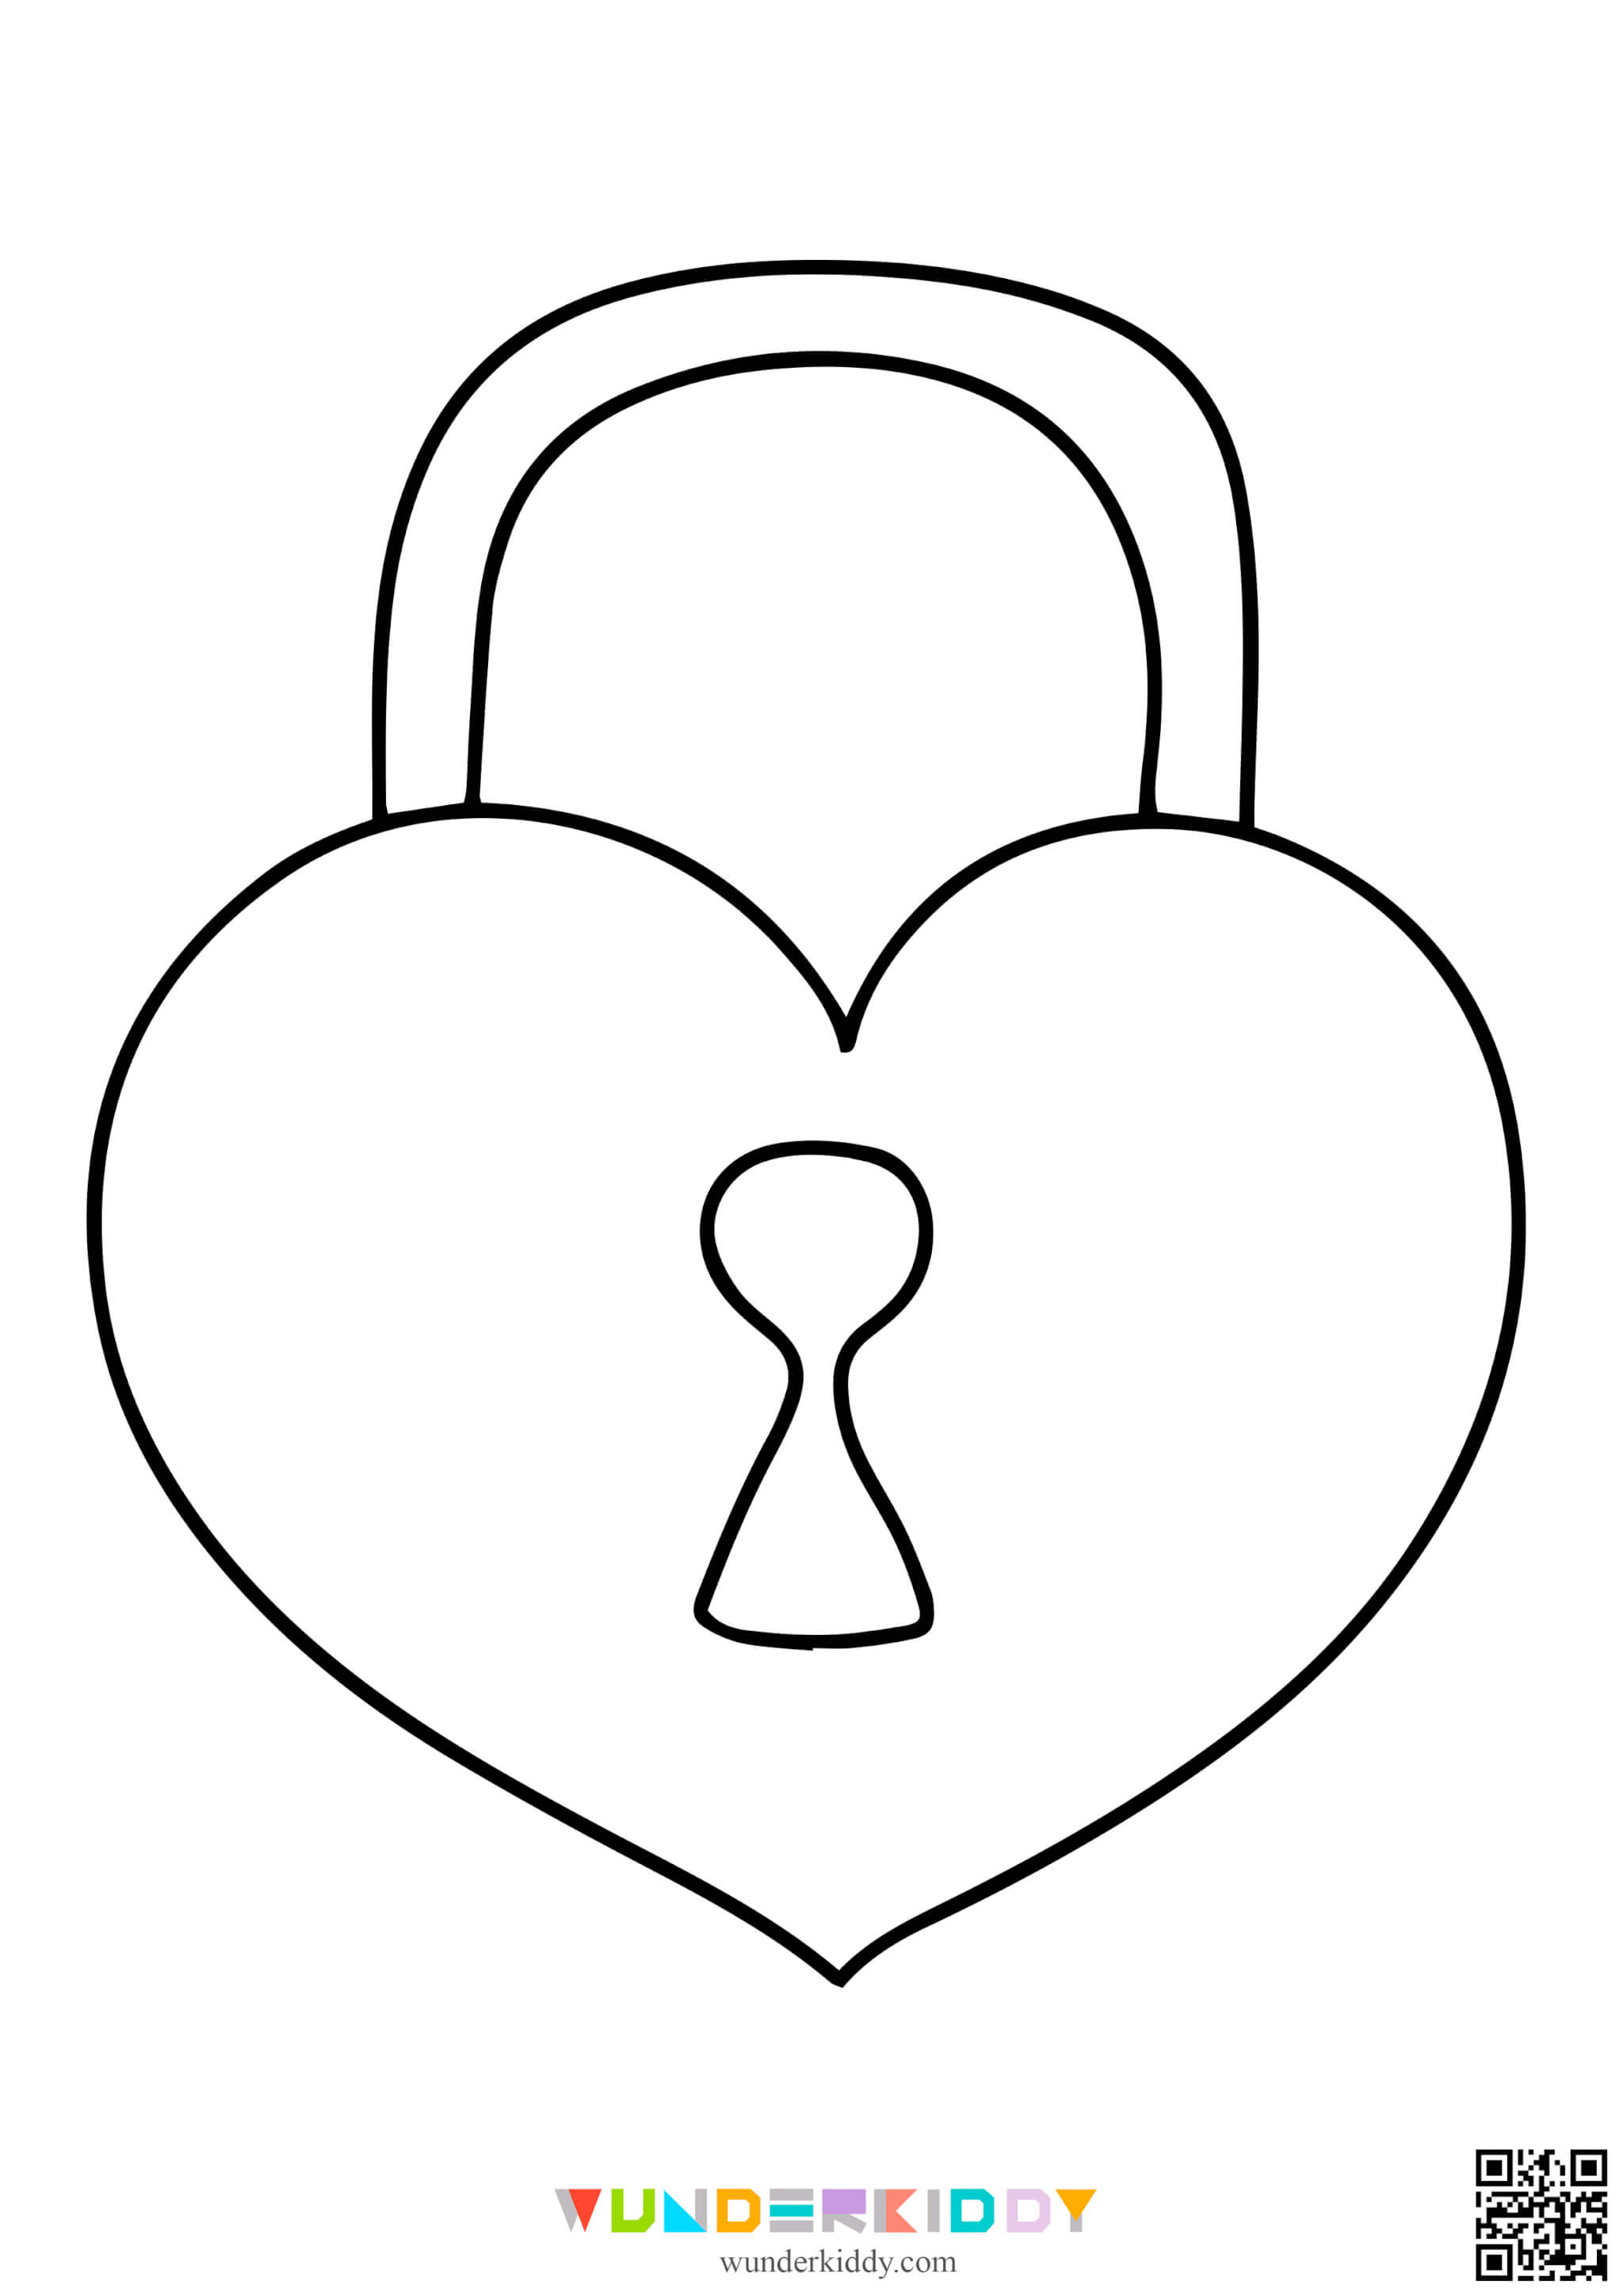 Valentines Coloring Pages - Image 10